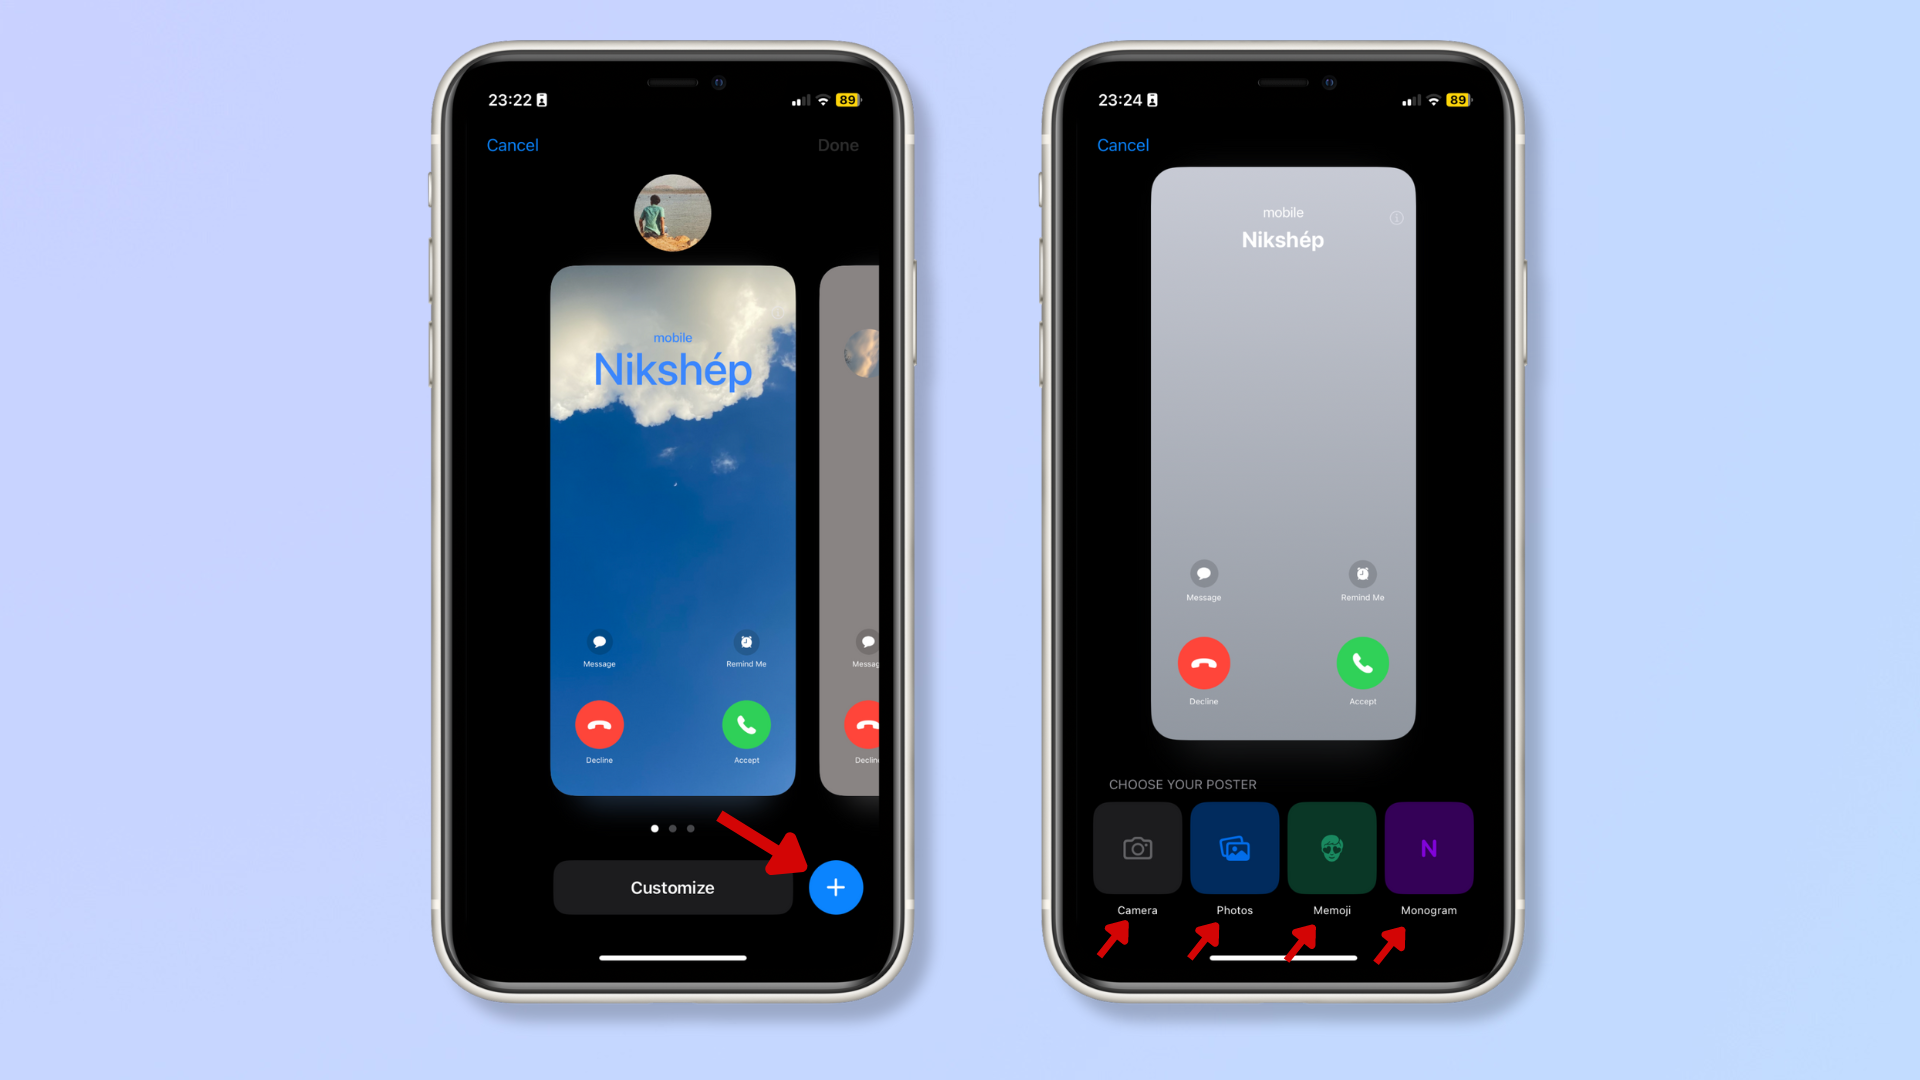 The first screenshot shows the Contact Poster creation menu with a red arrow pointing at a blue plus icon. The second screenshot shows the Contact Poster-type menu, with red arrows pointing at Camera, Photos, Memoji, and Monogram. 